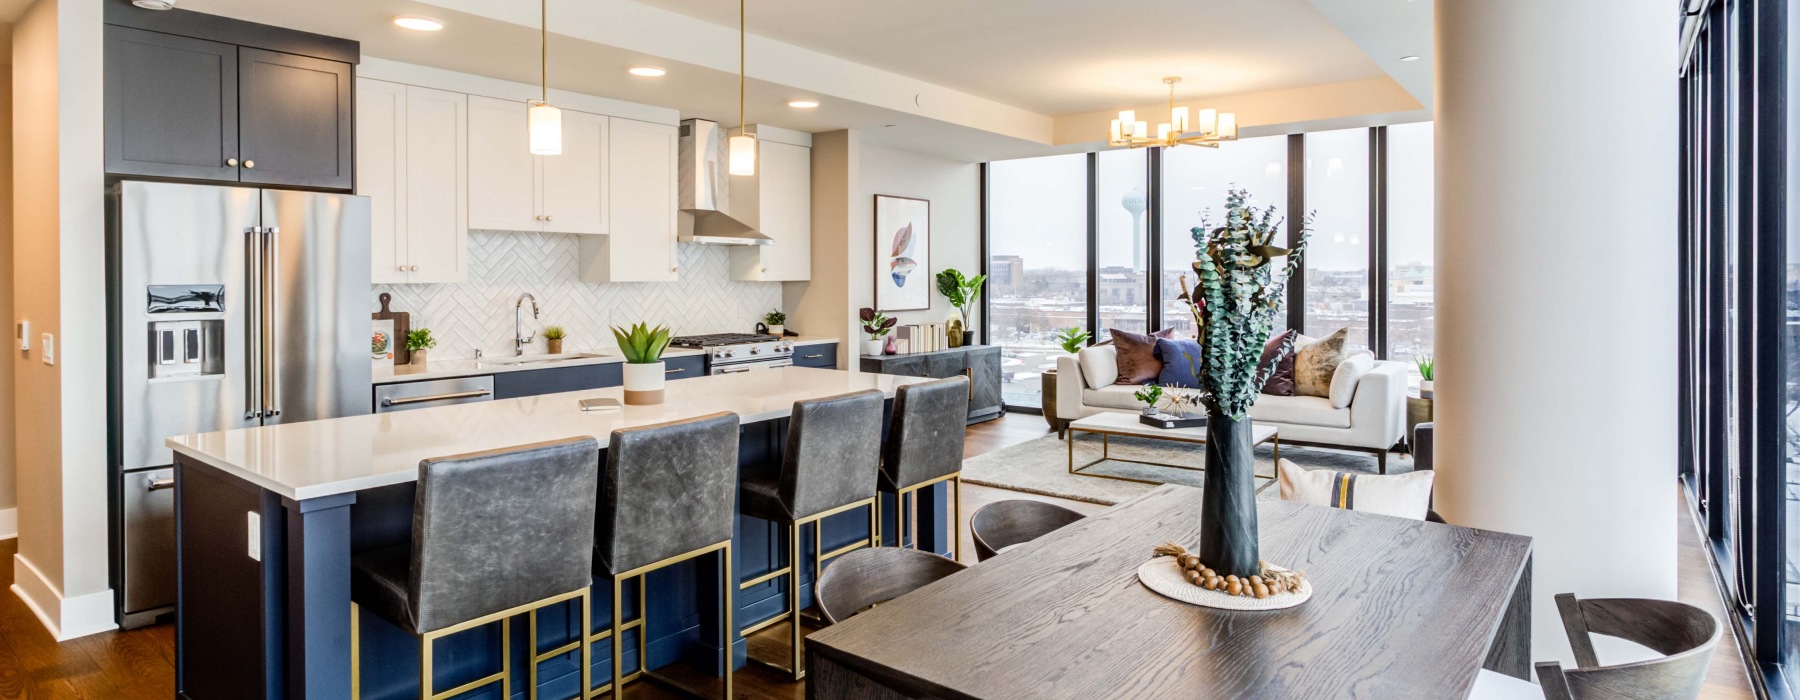 Luxury finishes with island kitchens and dining areas in select homes